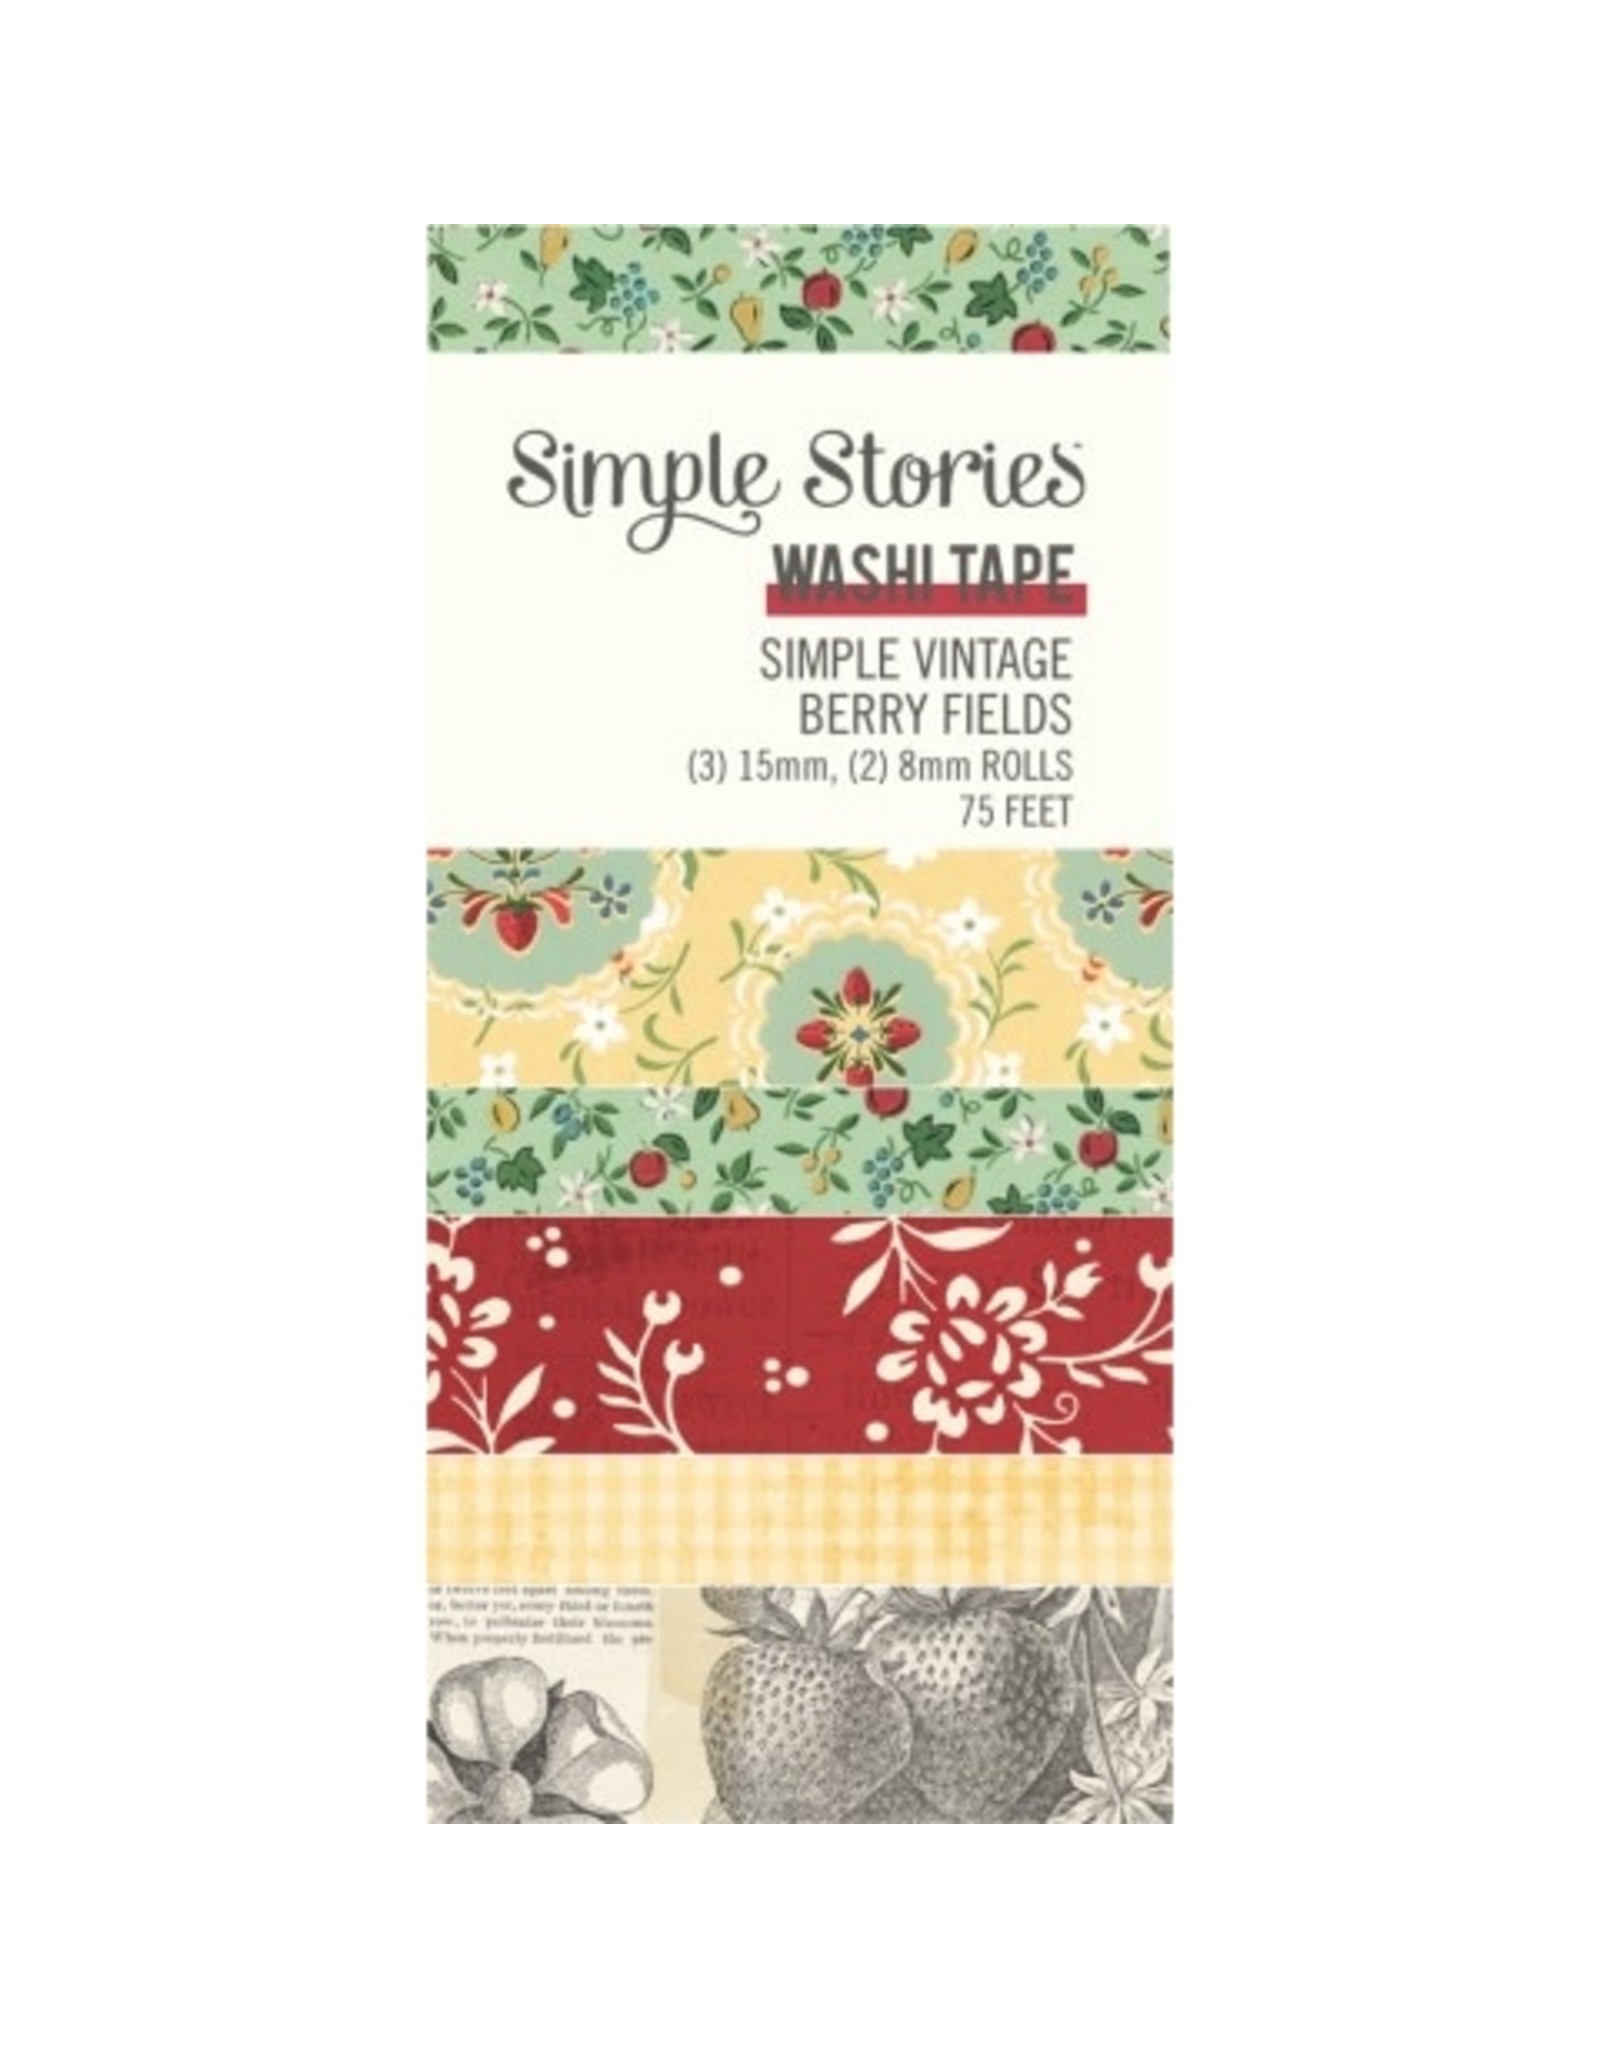 Simple Stories Simple Vintage Berry Fields - Washi Tape